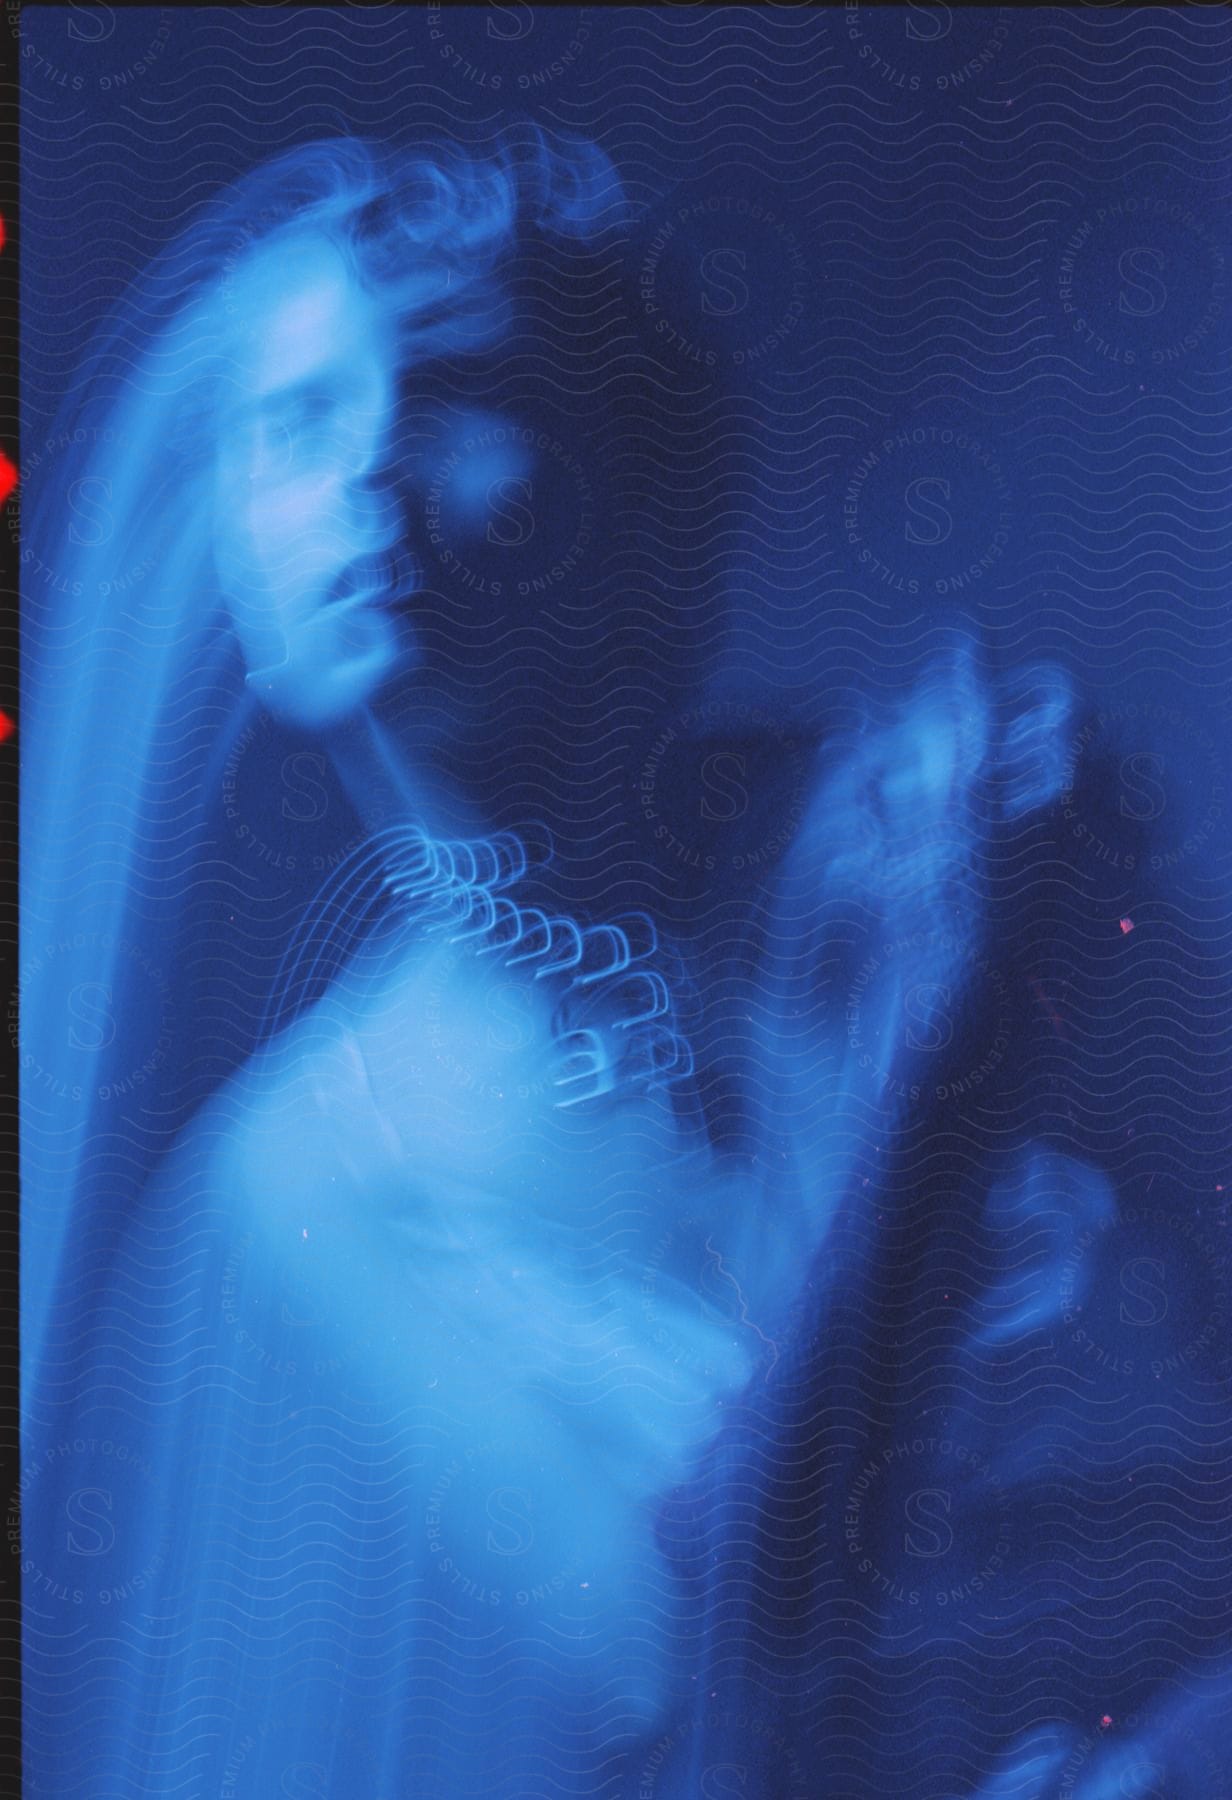 Abstract image of a womans face and body distorted by motion blur under blue lights